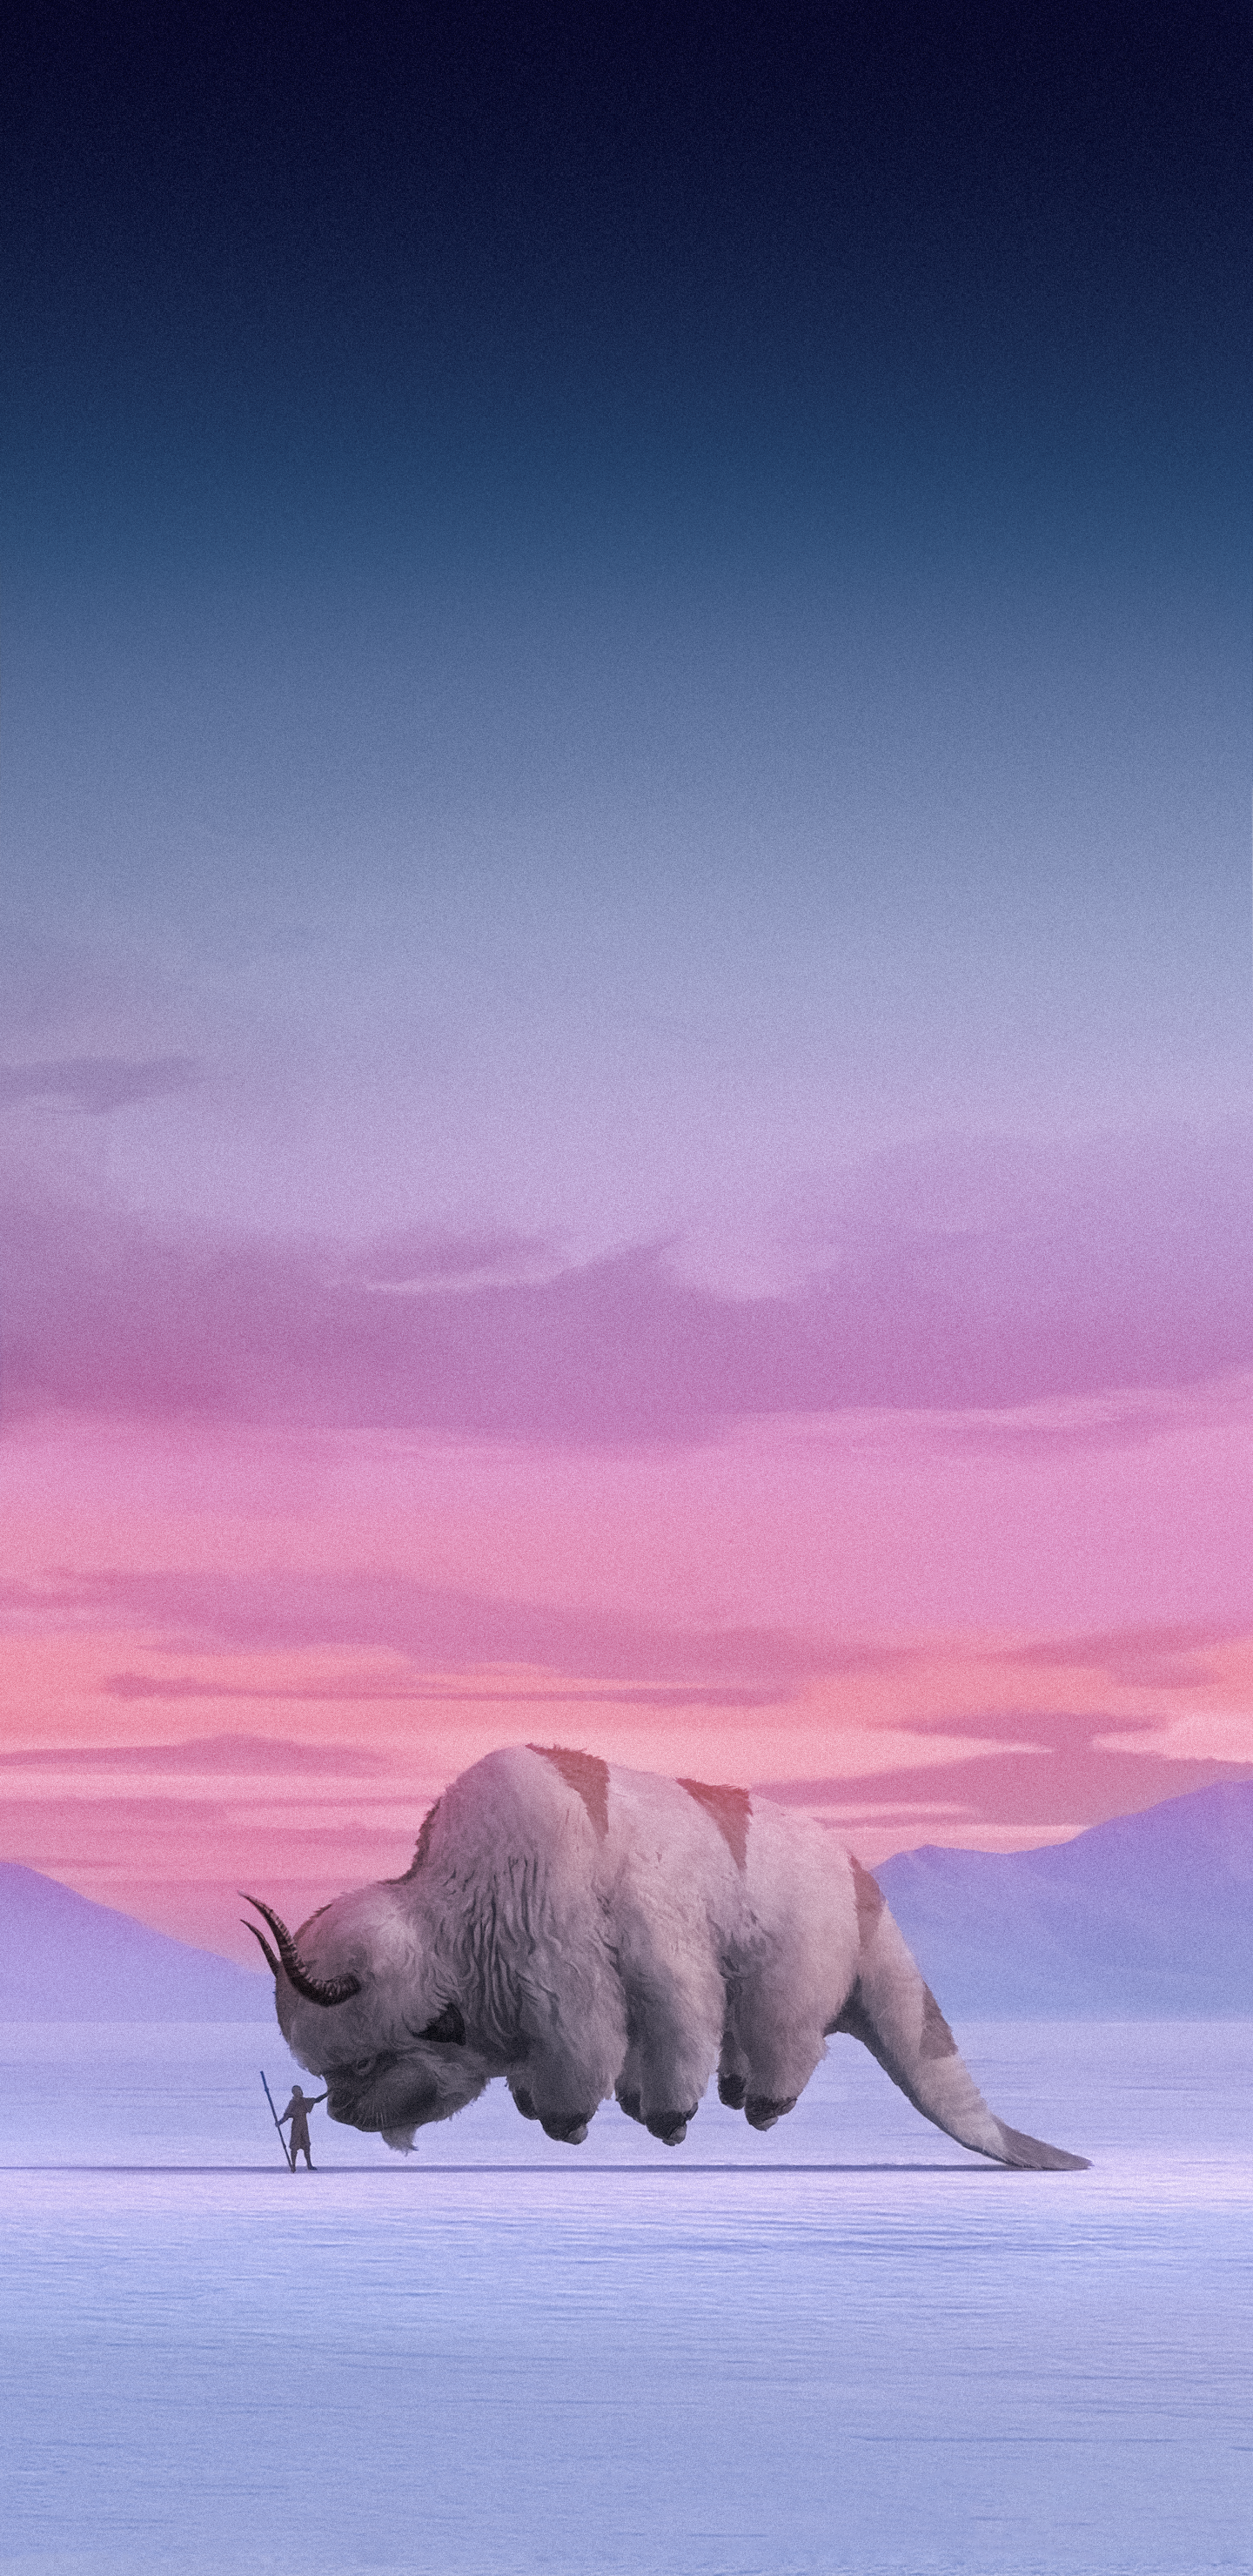 i edited this wallpaper with appa and aang in photohop